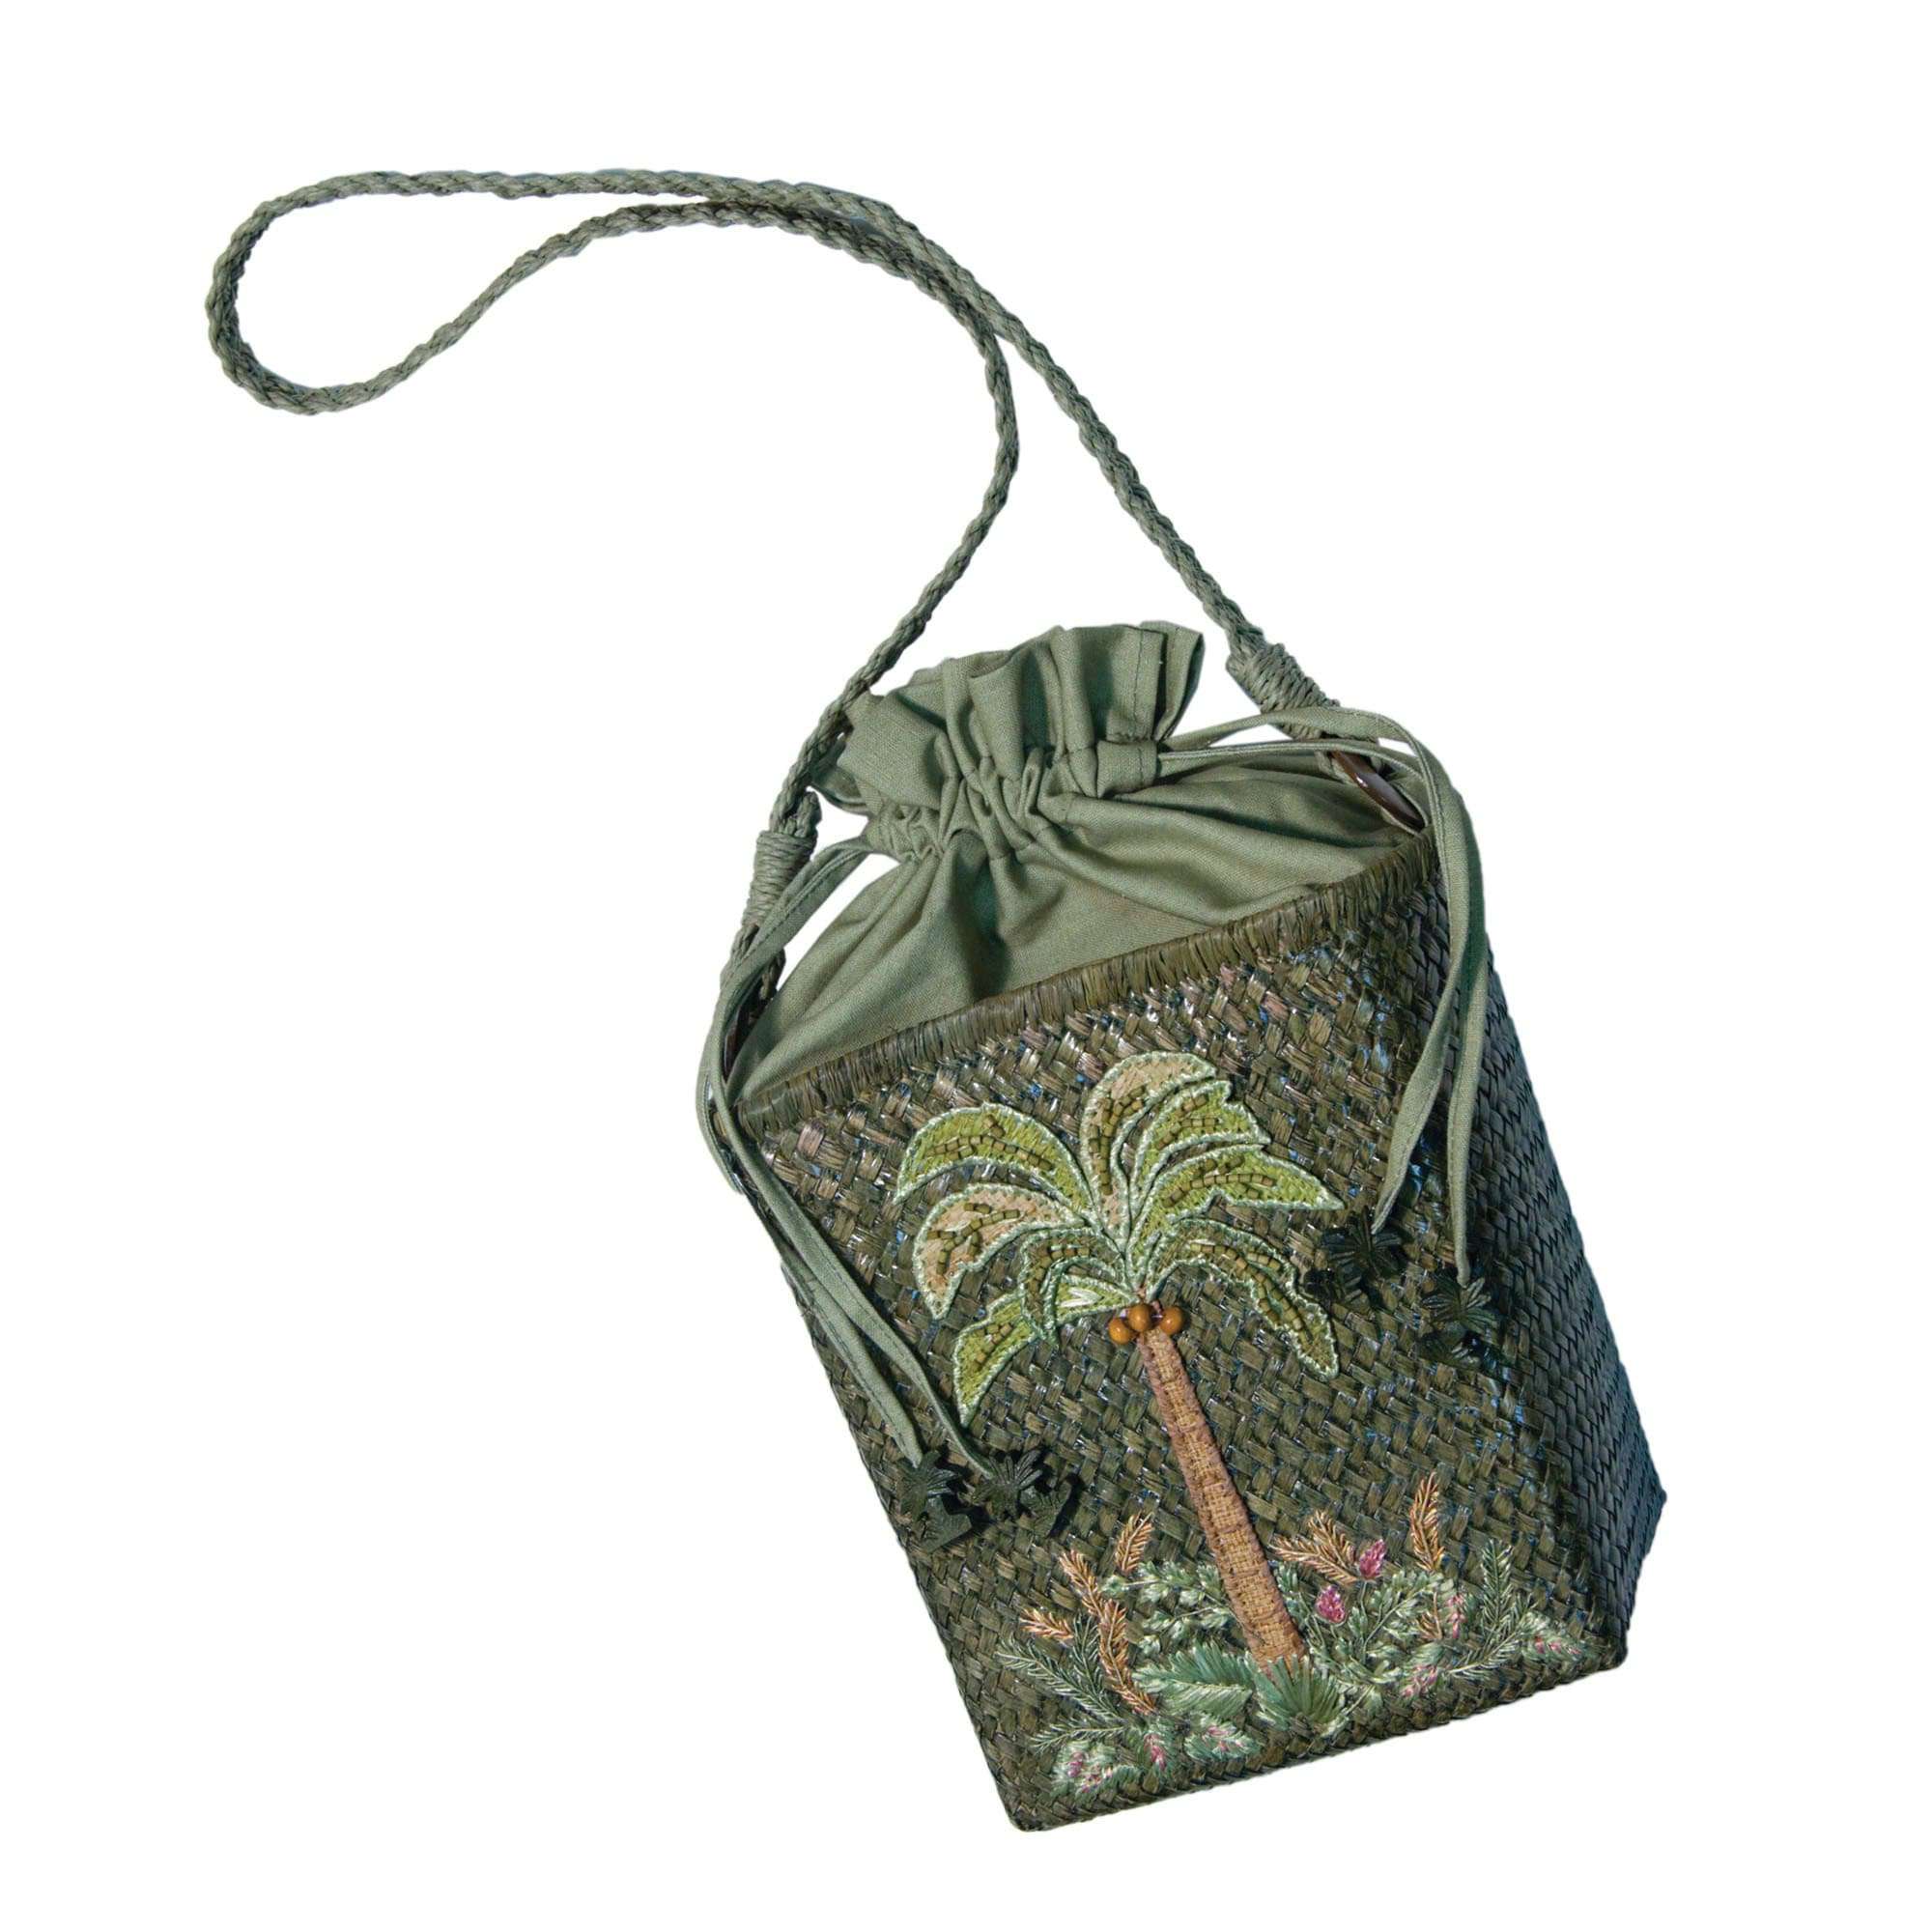 Cappelli's Seagrass Bag with Palm Tree Embroidery Bags Cappelli Straworld WSbag612 Olive  